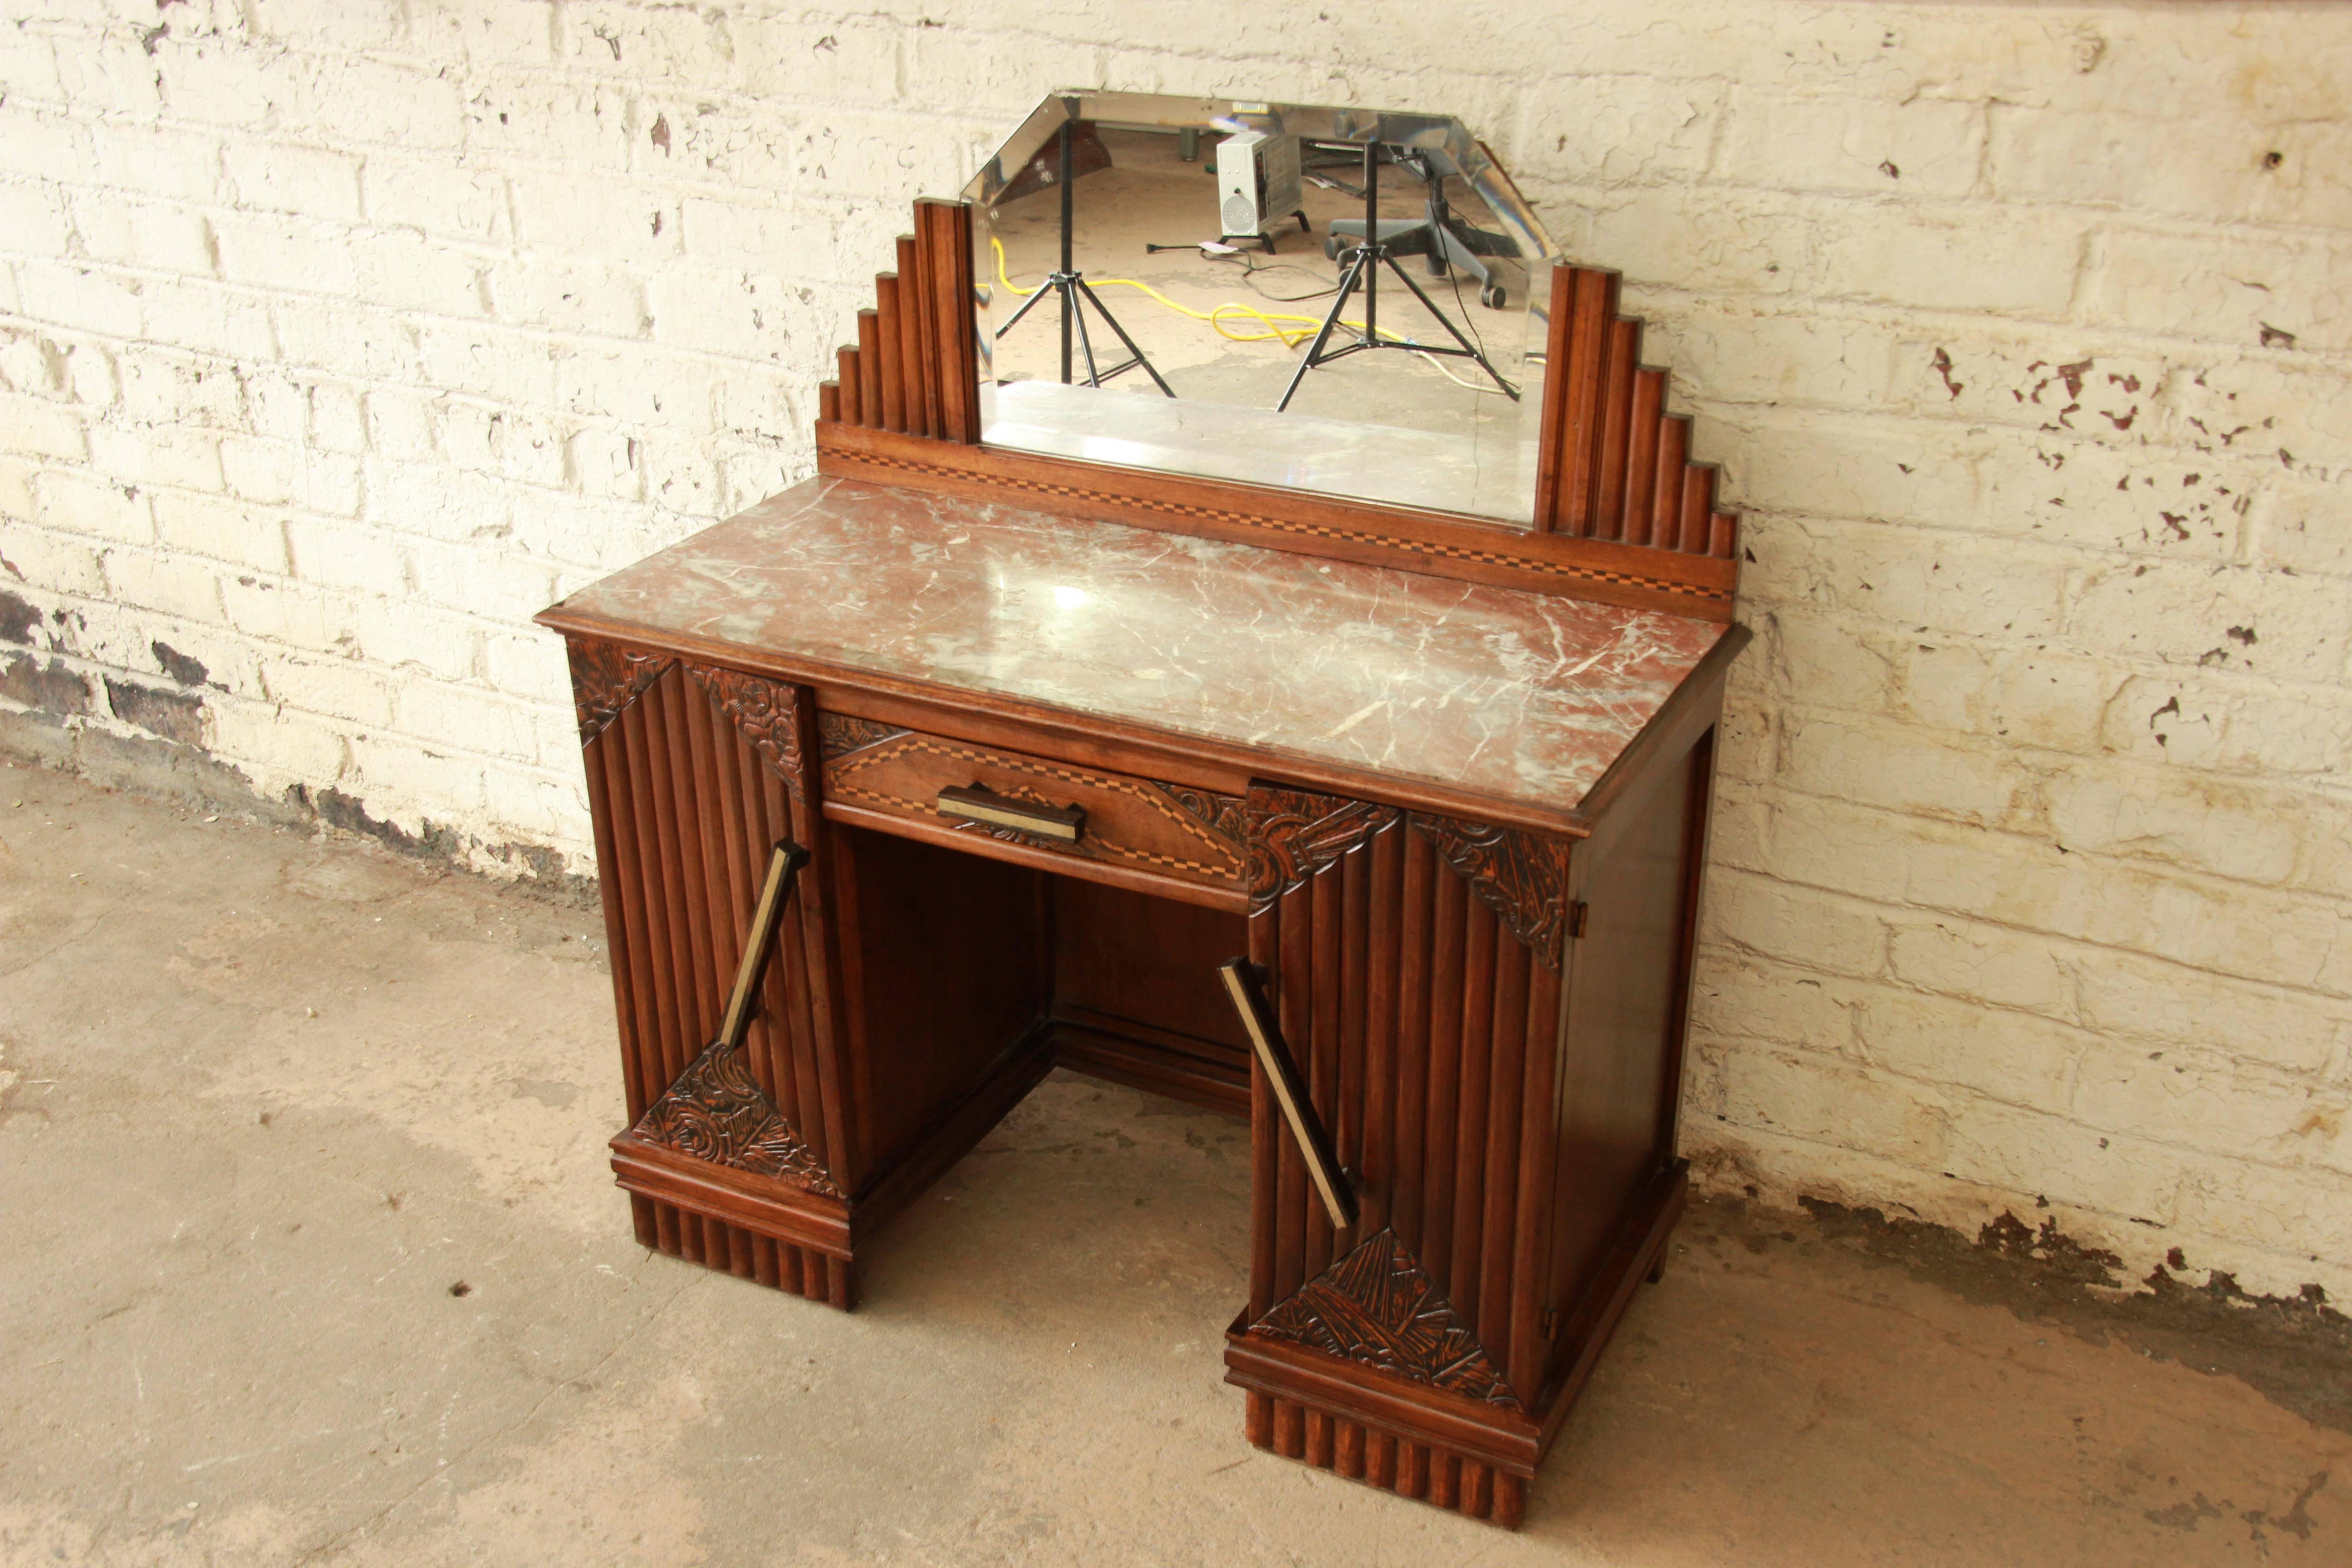 Exceptional 1930s French Art Deco marble-top vanity. The vanity features gorgeous hand-carved details, a beautiful inset marble top, and a beveled mirror. It is very well constructed from solid walnut, with dovetail joints. There is one very small